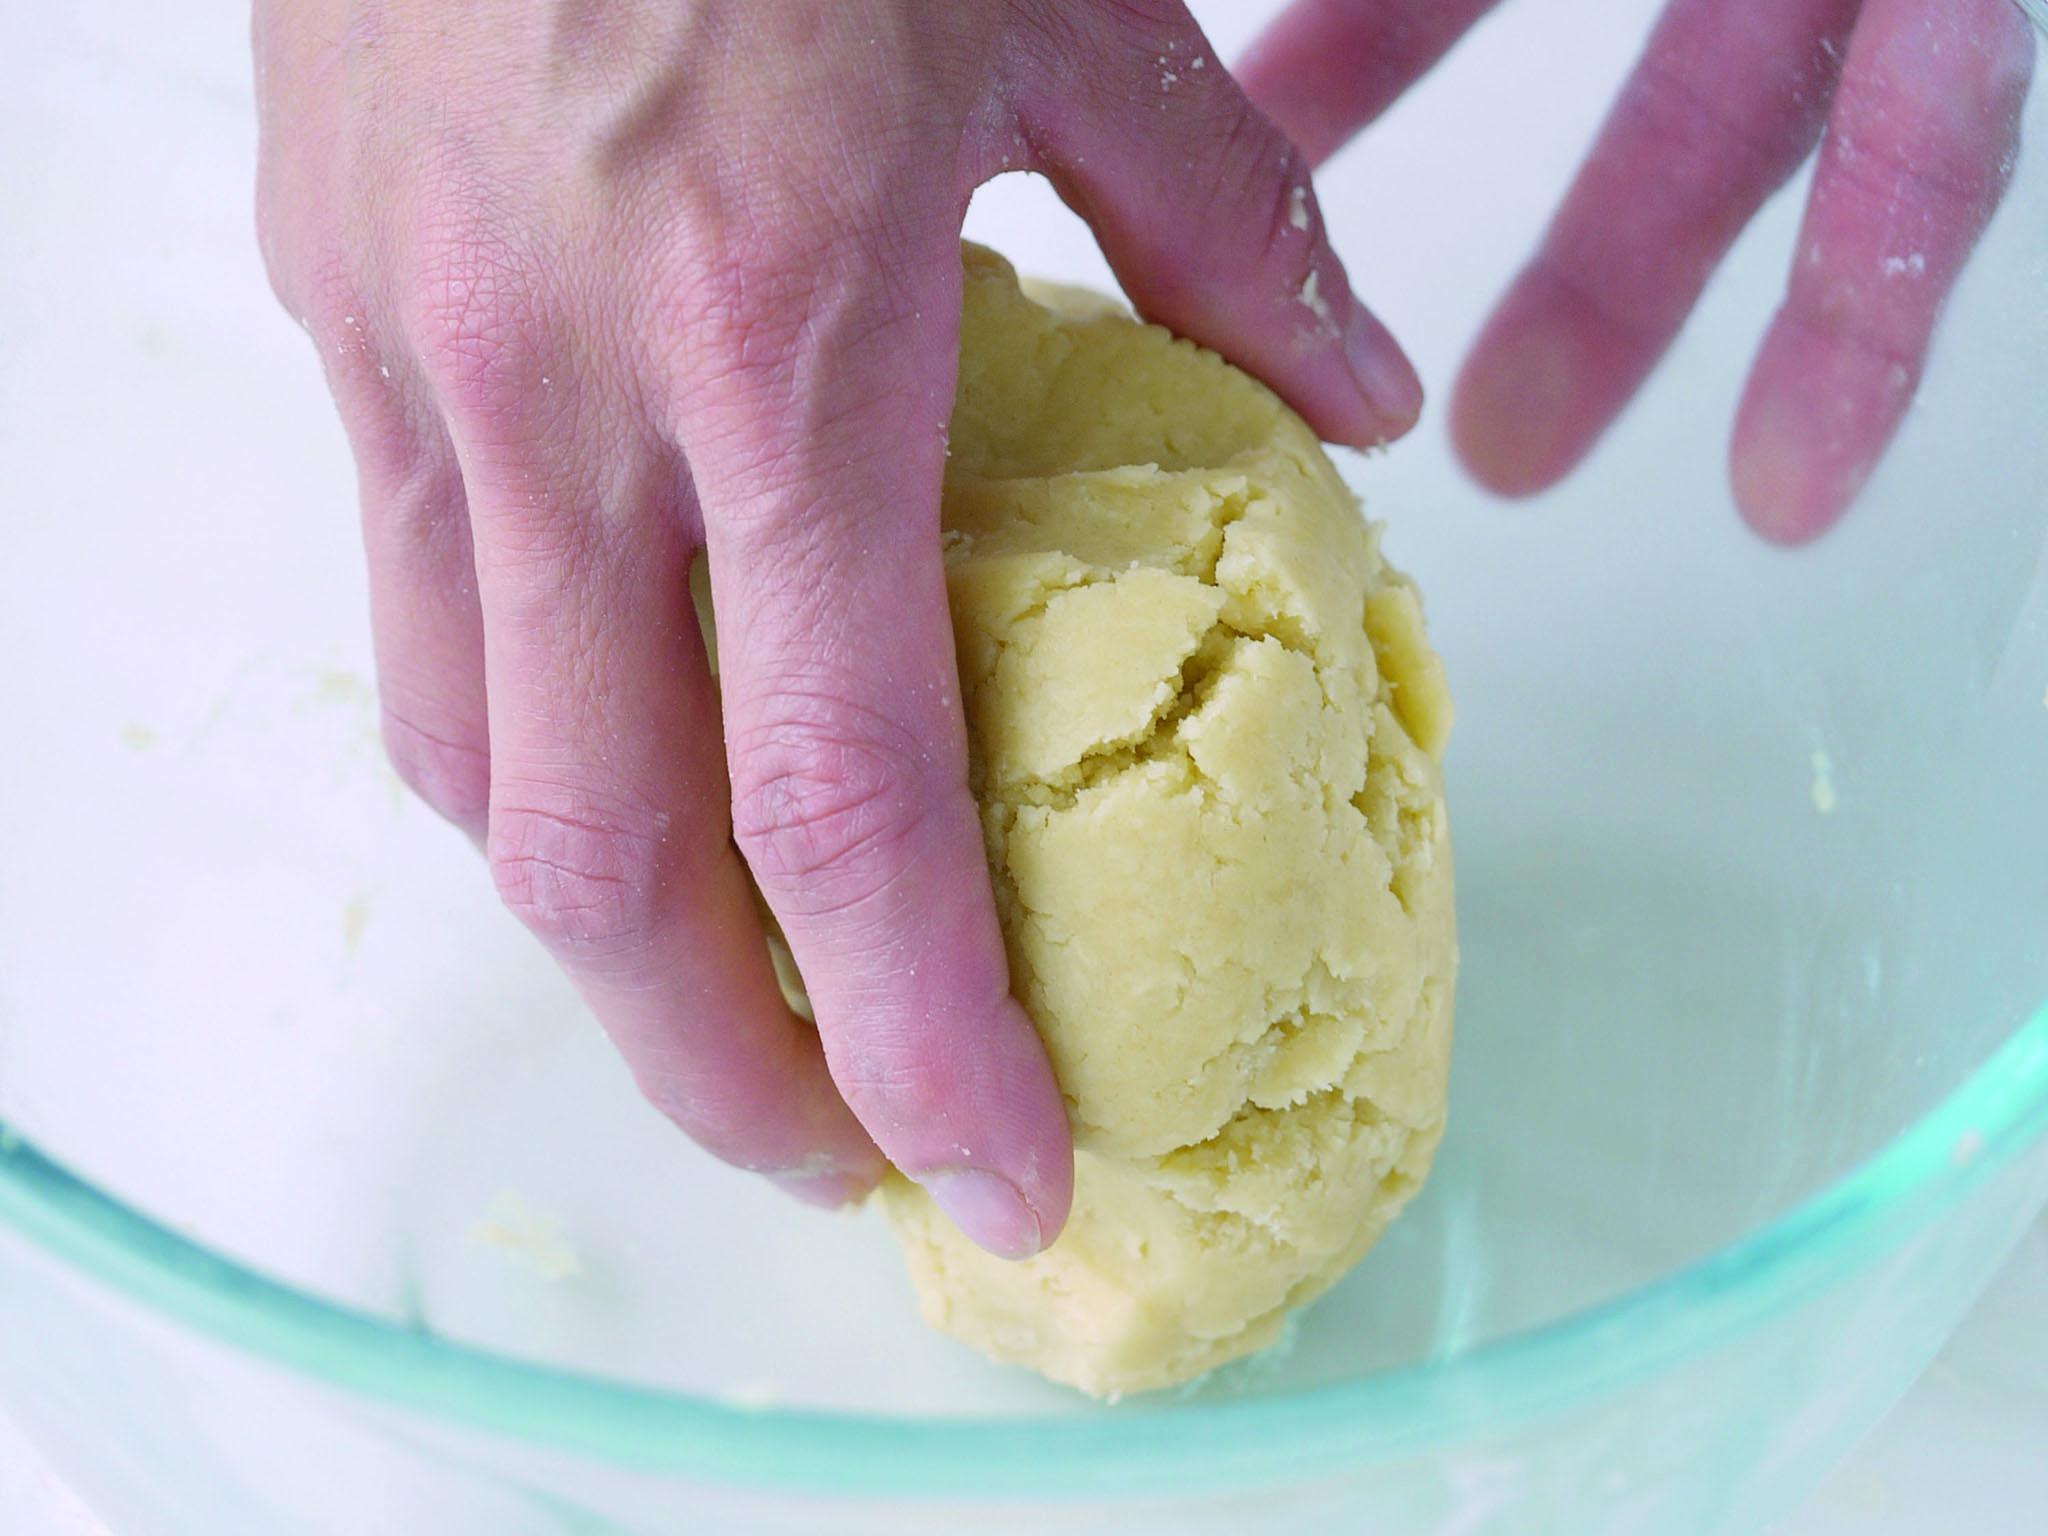 8. Pull the pastry together with your hands, shaping it into a flat disc, about 10cm in diametre and 1.5cm thick. Do this as quickly as possible, without overworking the pastry, which also makes it tough